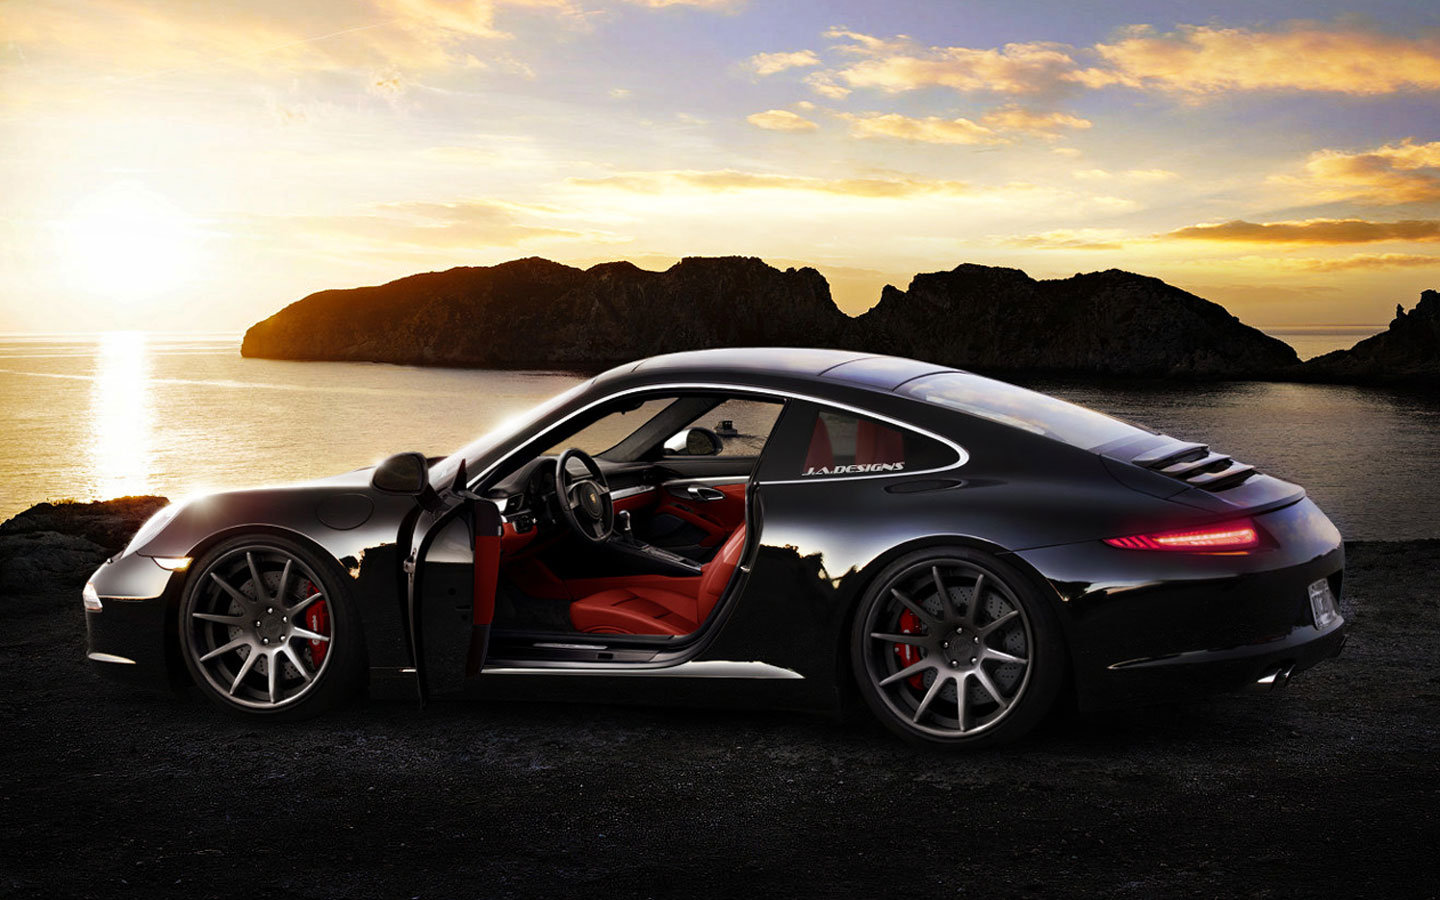 Cool Porsche 911 Car Dekstop HD Wallpapers 21 pictures wfz, this wallpaper you can use as the background/wallpaper of computer dekstop, laptop, ...